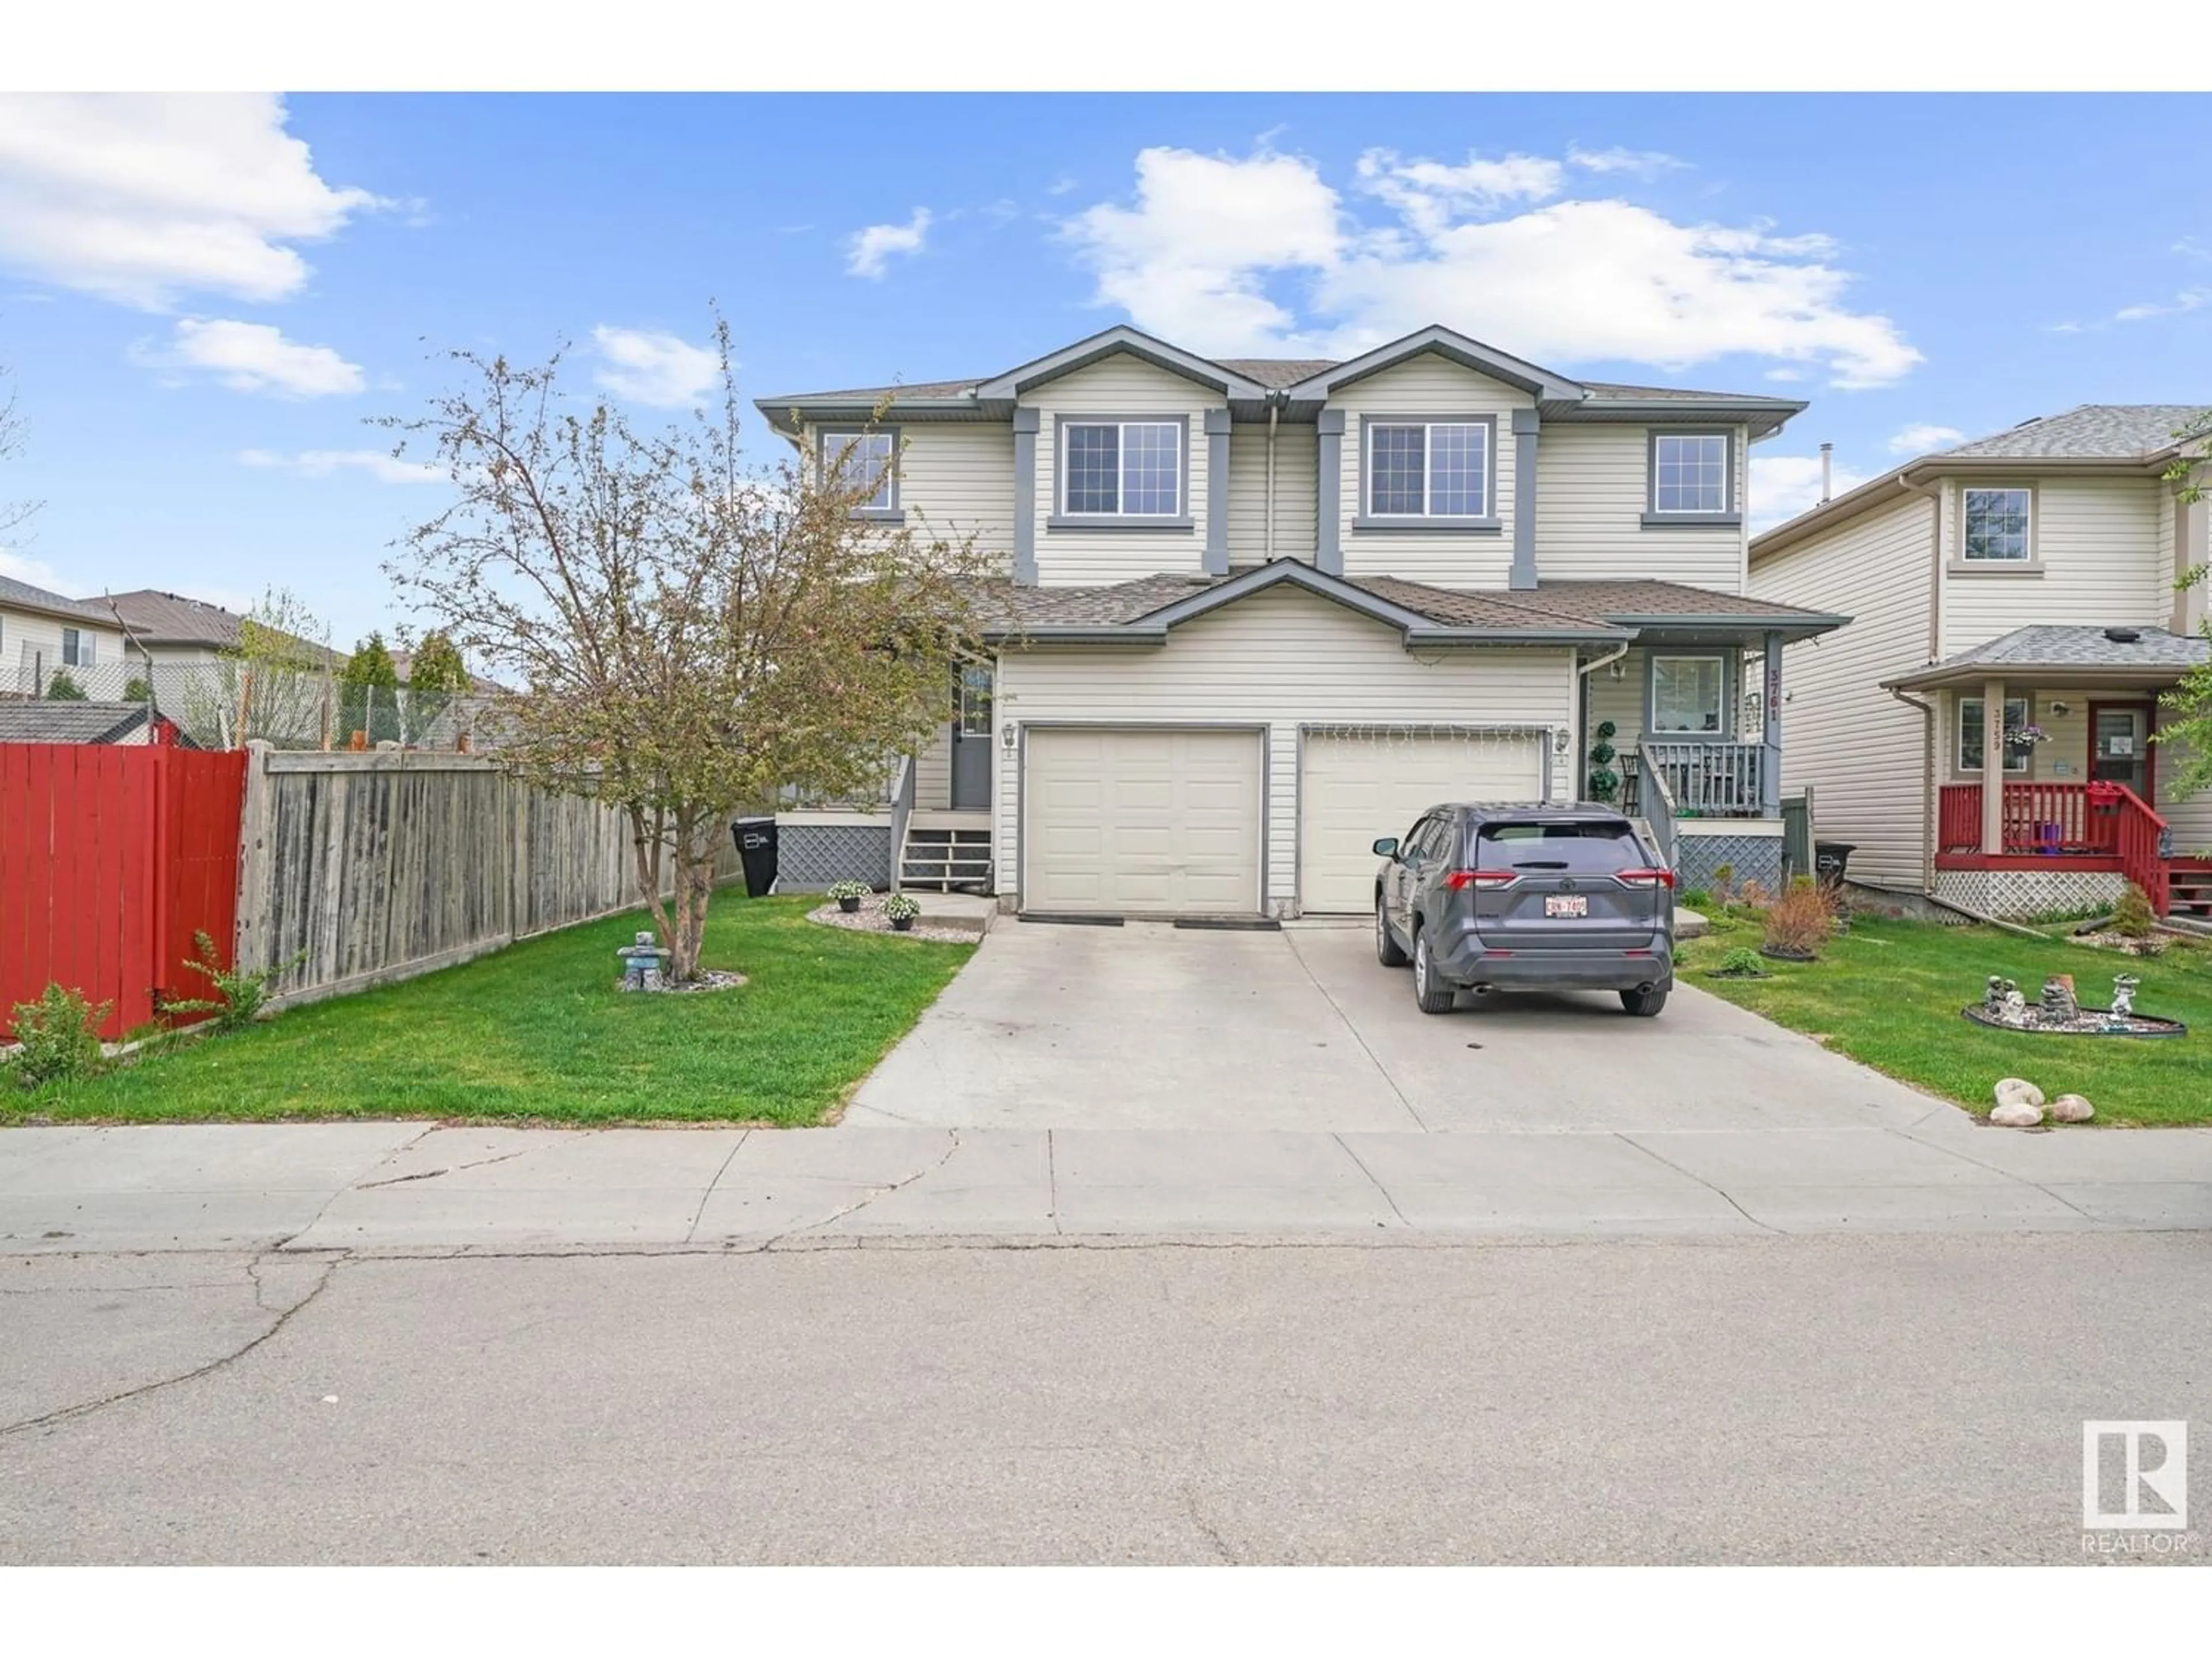 Frontside or backside of a home for 3763 22 ST NW, Edmonton Alberta T6T1R6